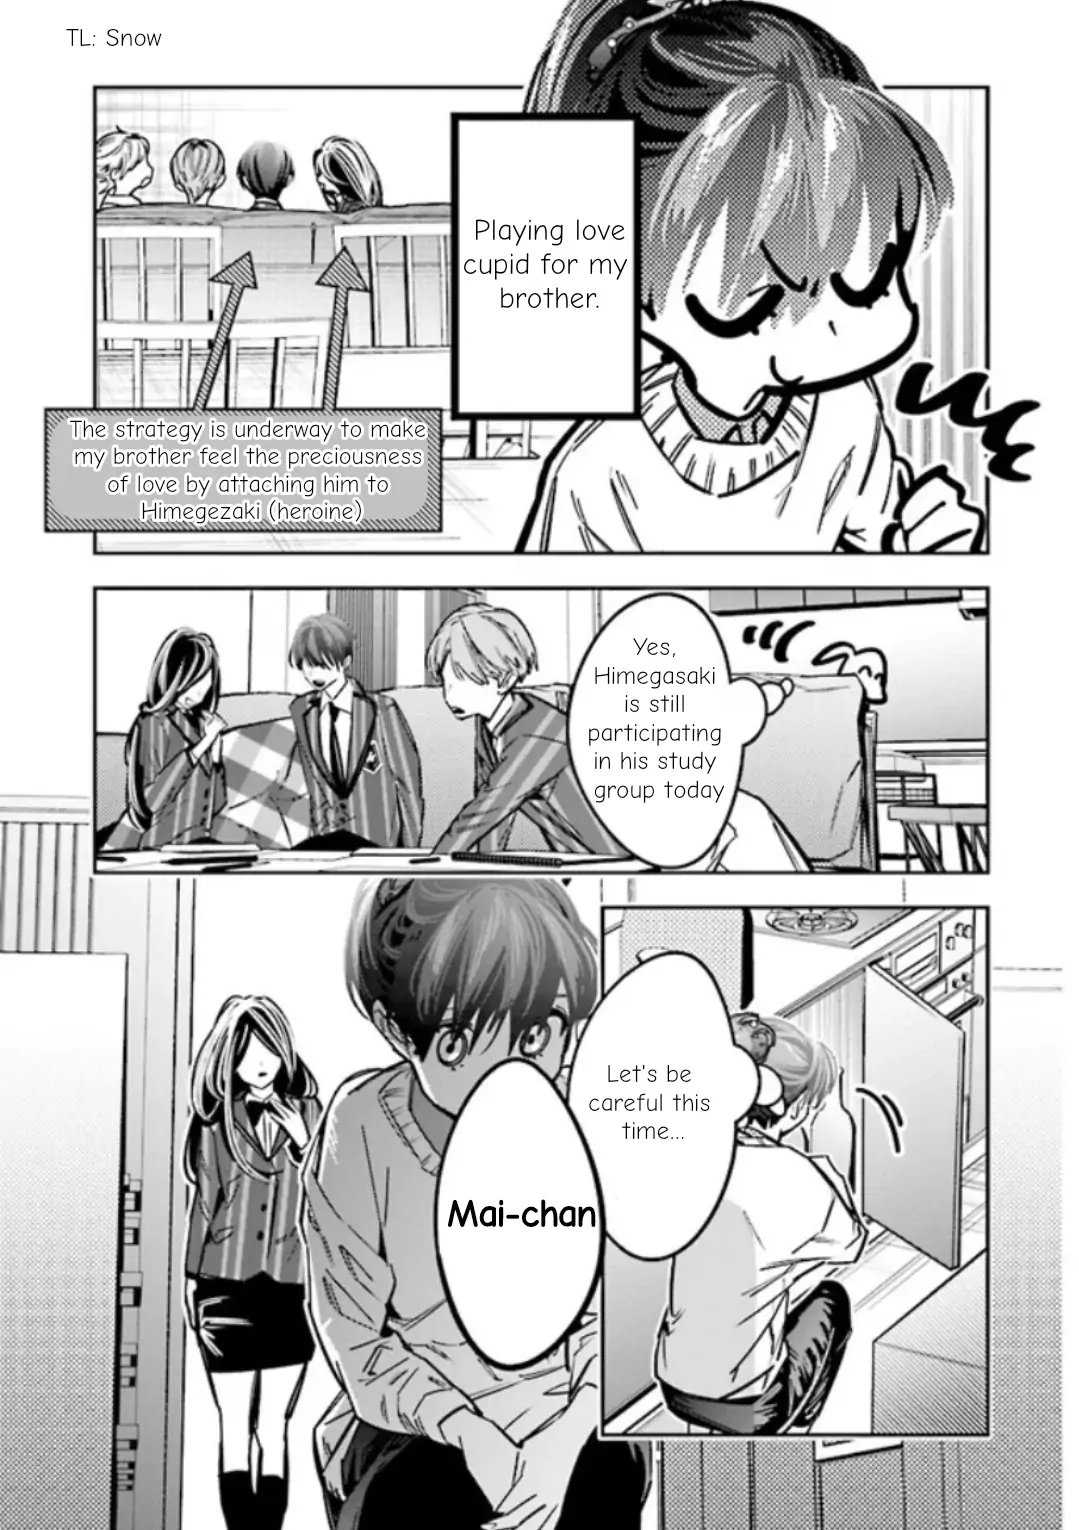 I Reincarnated As The Little Sister Of A Death Game Manga's Murder Mastermind And Failed - chapter 10 - #4